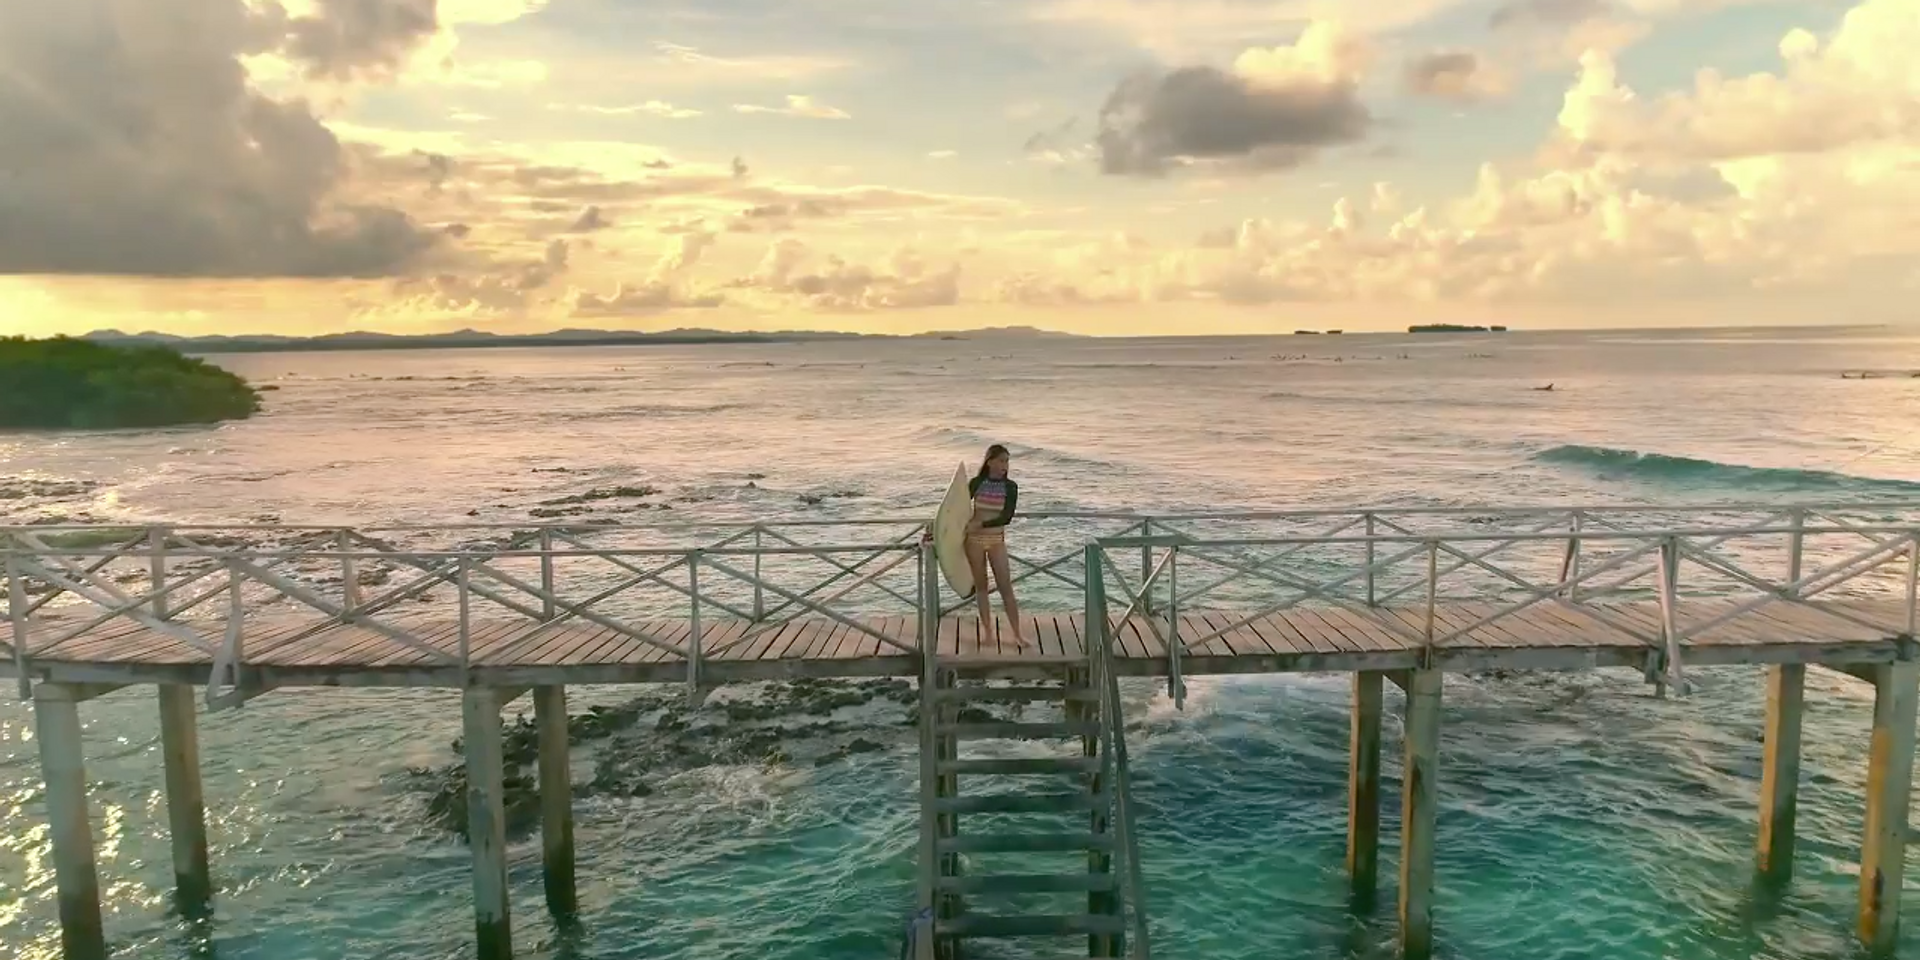 Hale and The Ransom Collective songs featured in 'Siargao' trailer – watch